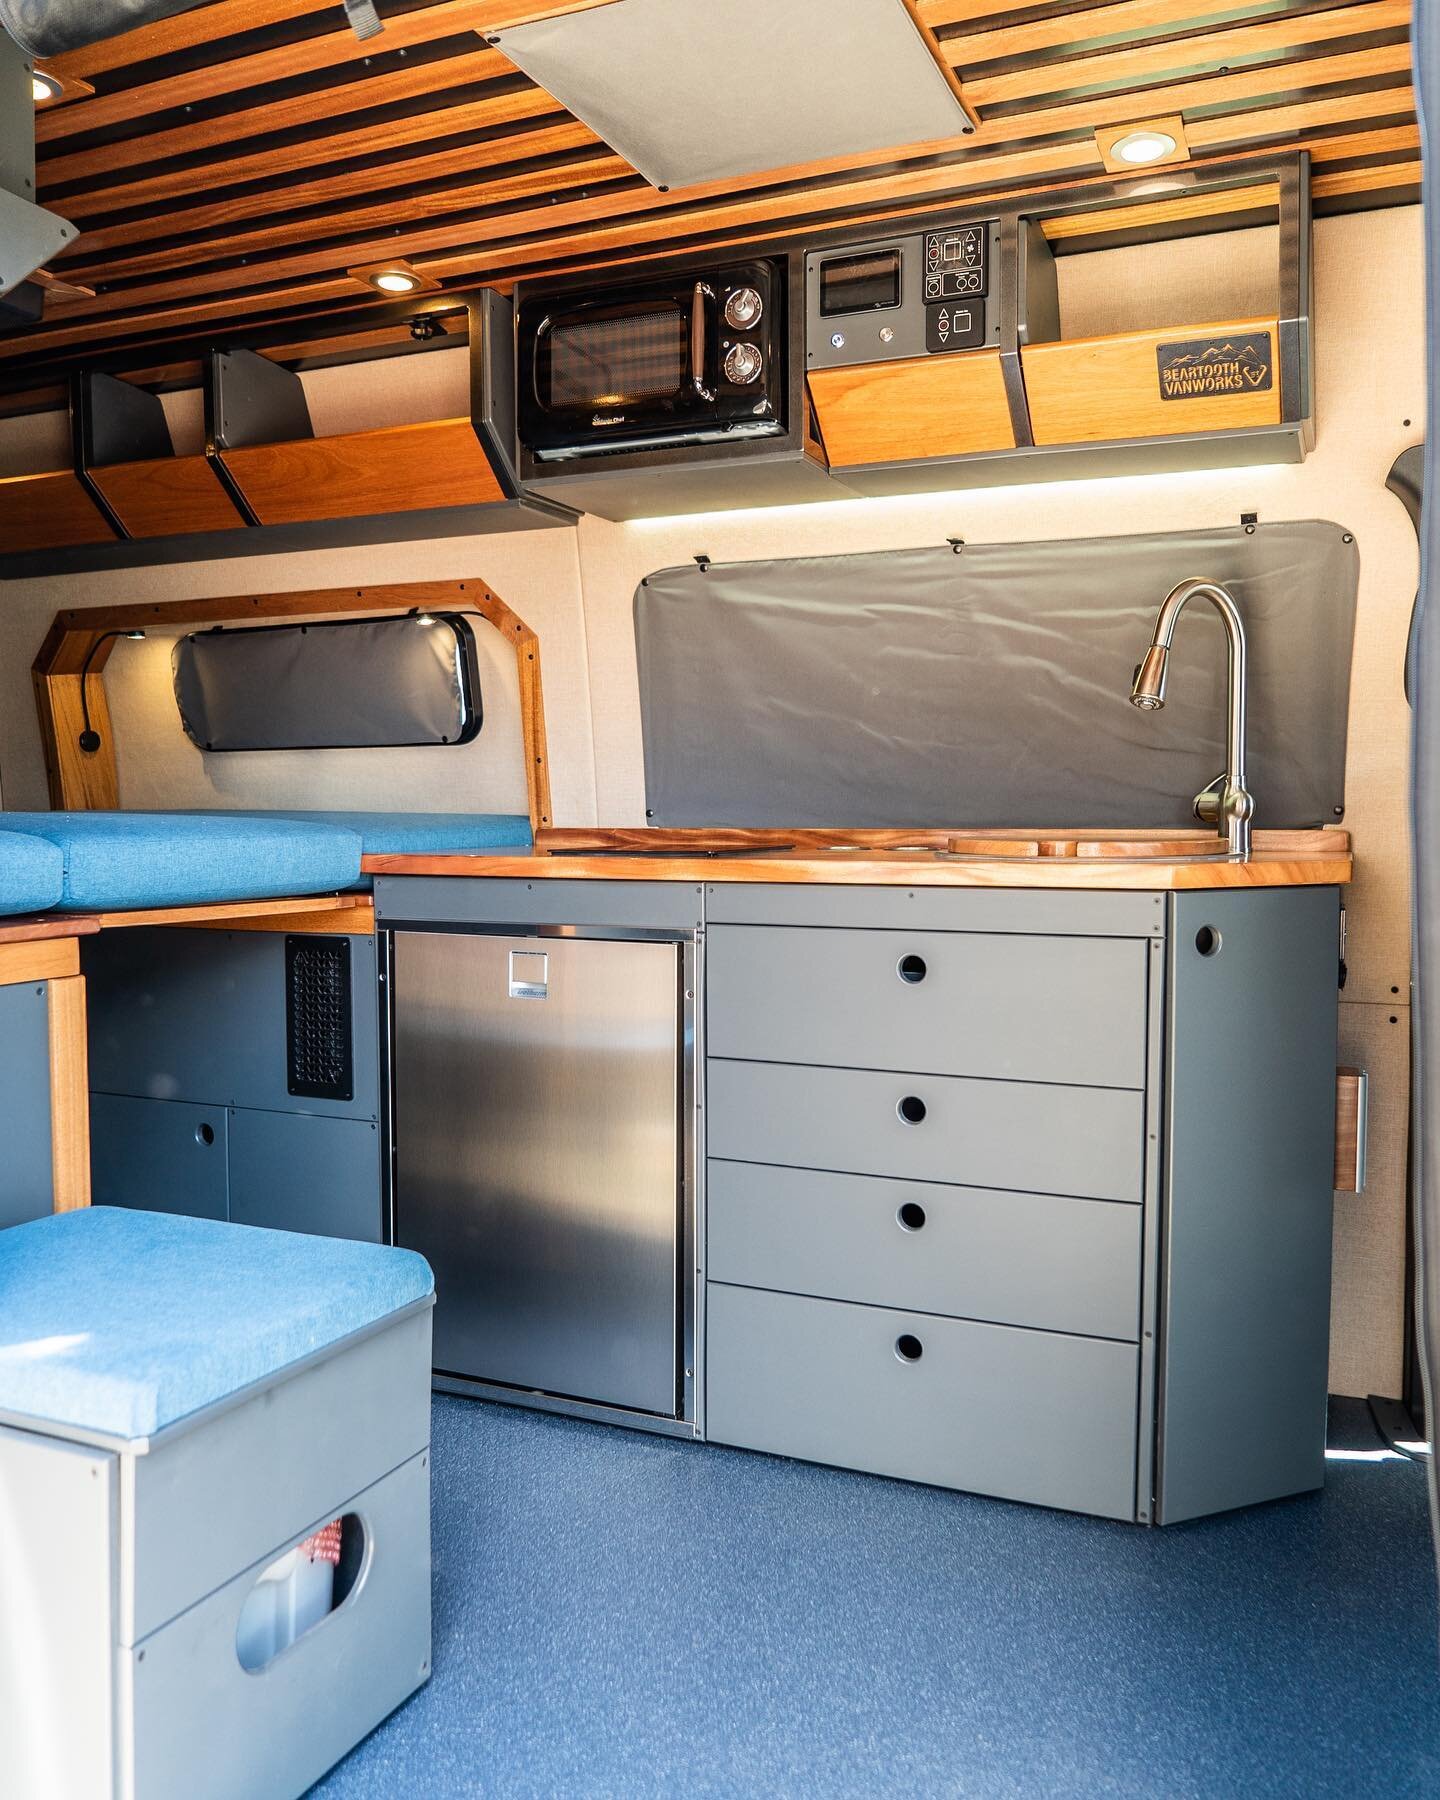 From the extended galley, to the sliding pull out cabinets, this new build maximizes storage space. Utilizing @_flarespace_ allows us to open up the space in the van and create new options for gear storage. Explore this build and more on our website!